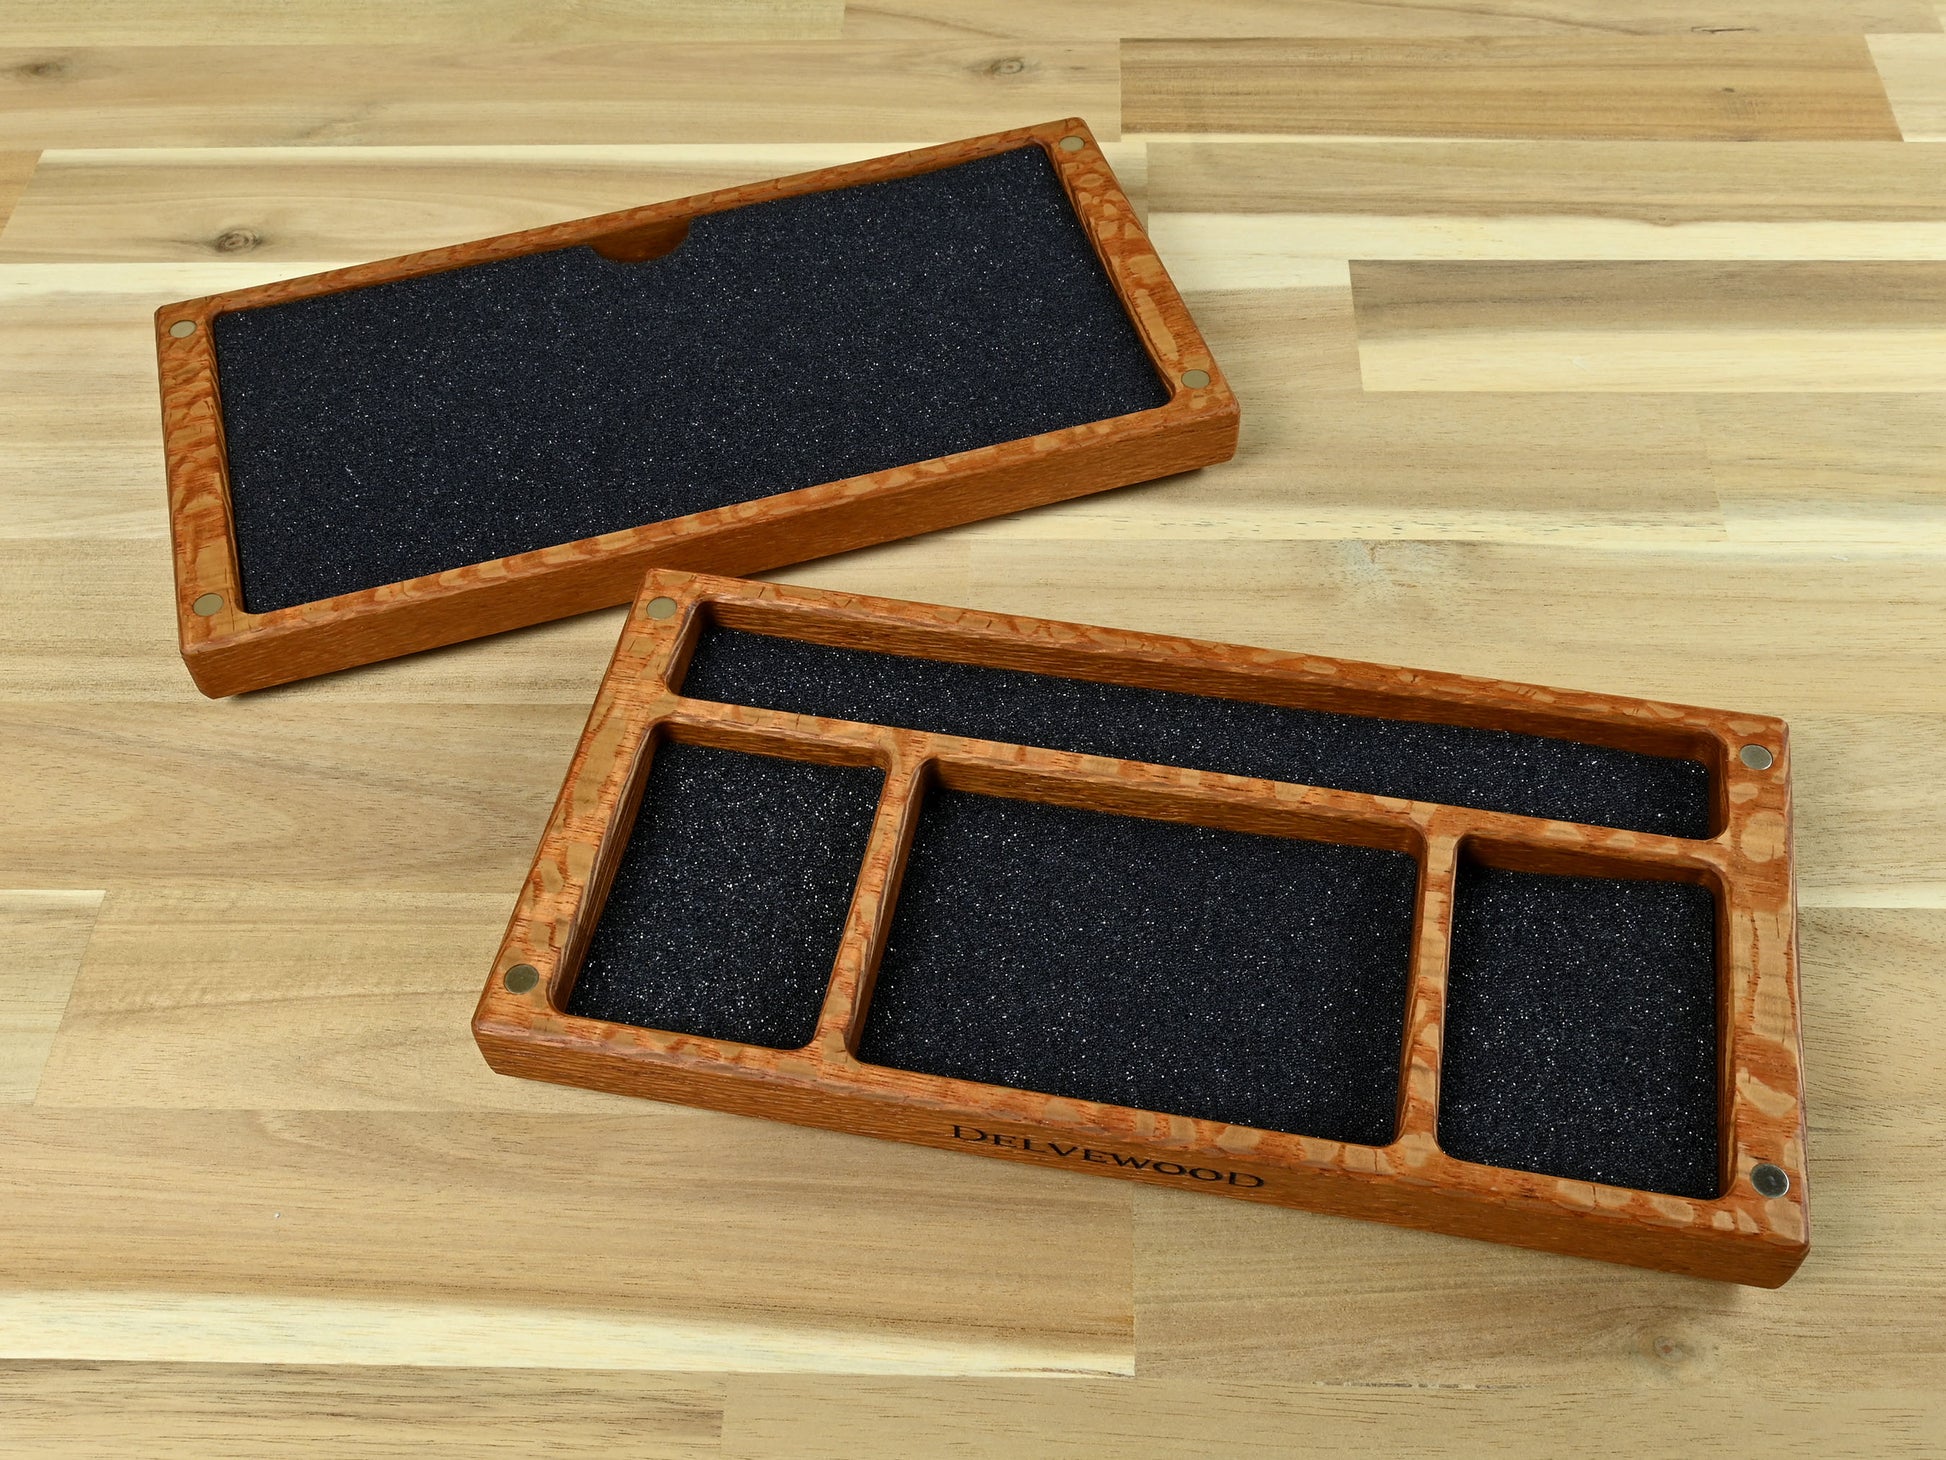 Lacewood Delver's kit dice box and tray for dnd rpg